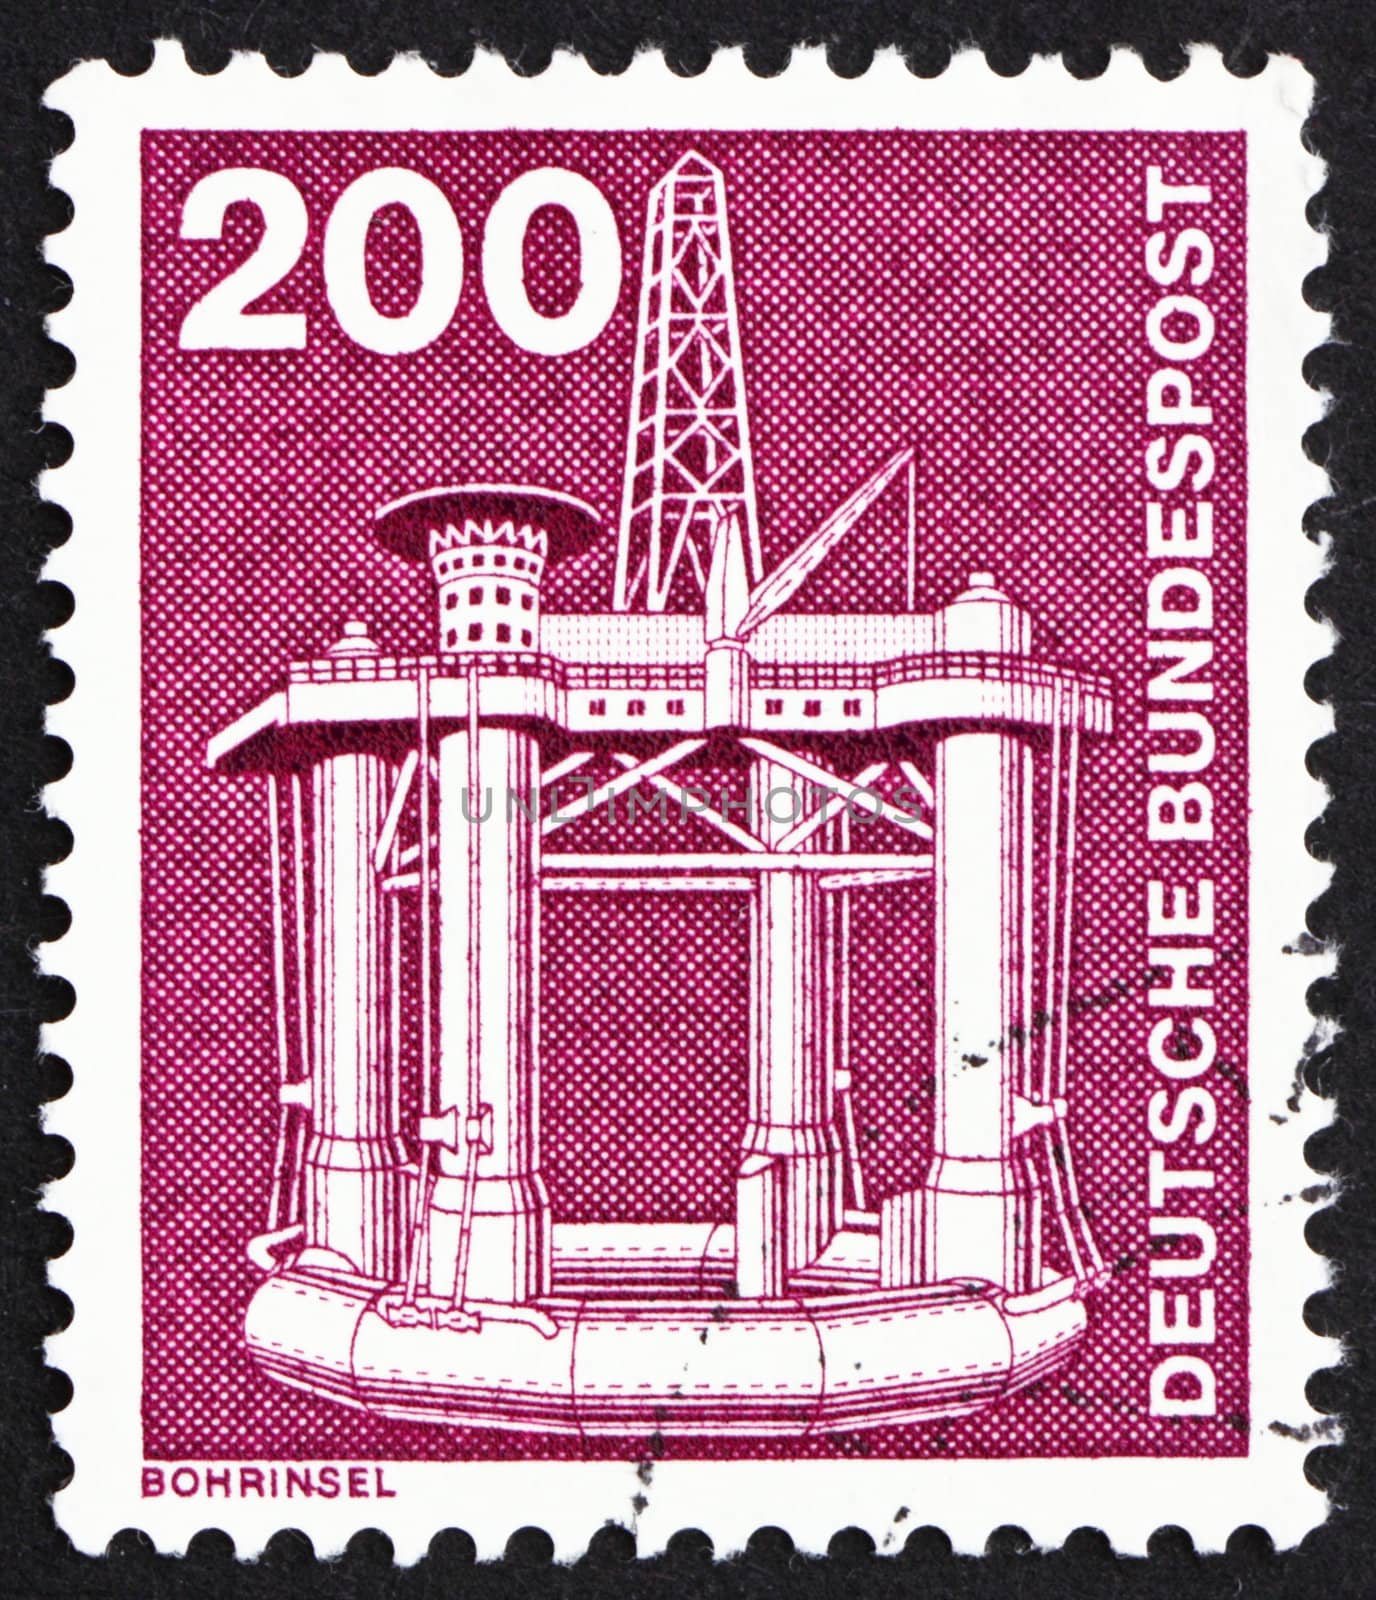 GERMANY - CIRCA 1975: a stamp printed in the Germany shows Oil Drilling, Oil, Platform, circa 1975